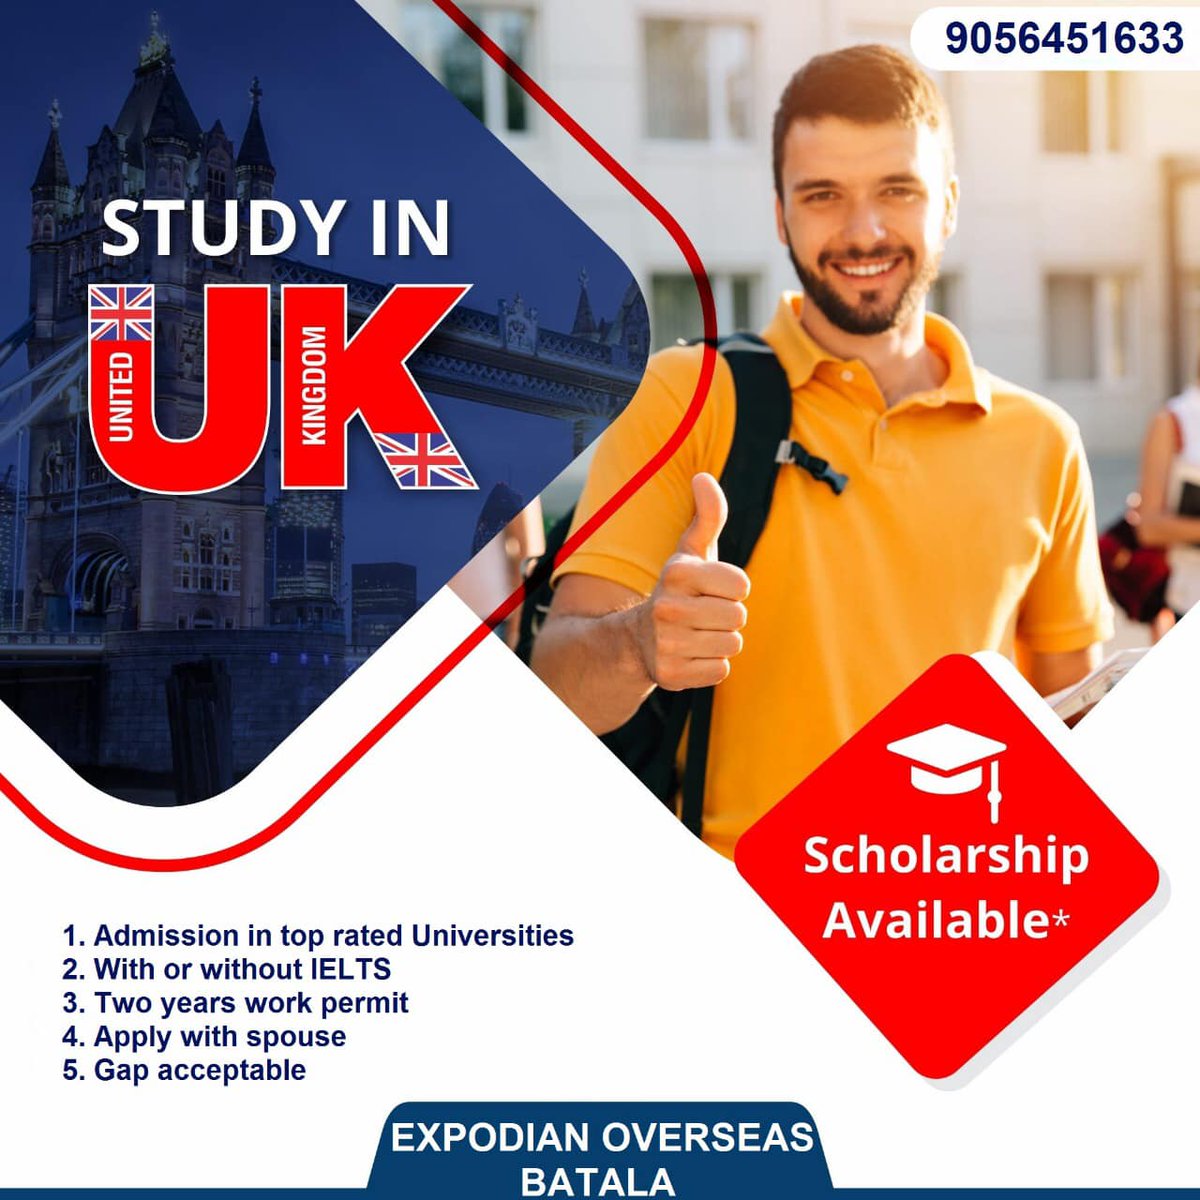 Get your UK study visa with or without IELTS | Two year work permit | Apply with spouse | Gap acceptable…For more information please contact EXPODIAN Overseas one of the best UK study visa consultants in batala city and nearby at +91 9056451633
#ukwithoutielts #ukstudyvisa